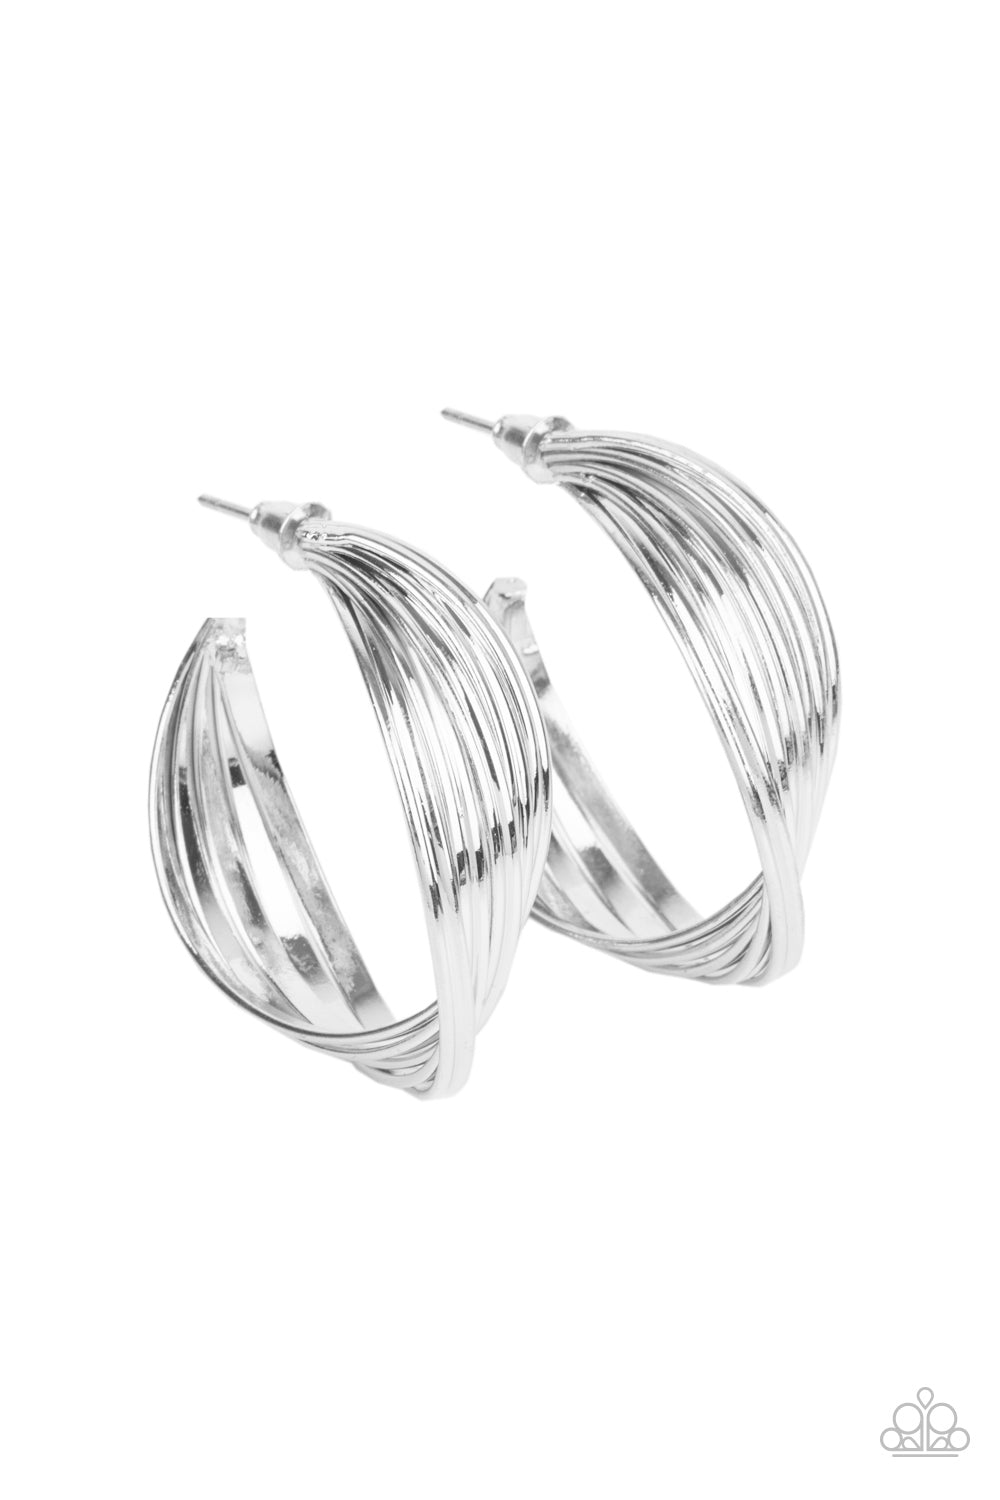 Curves In All The Right Places - Silver Earrings